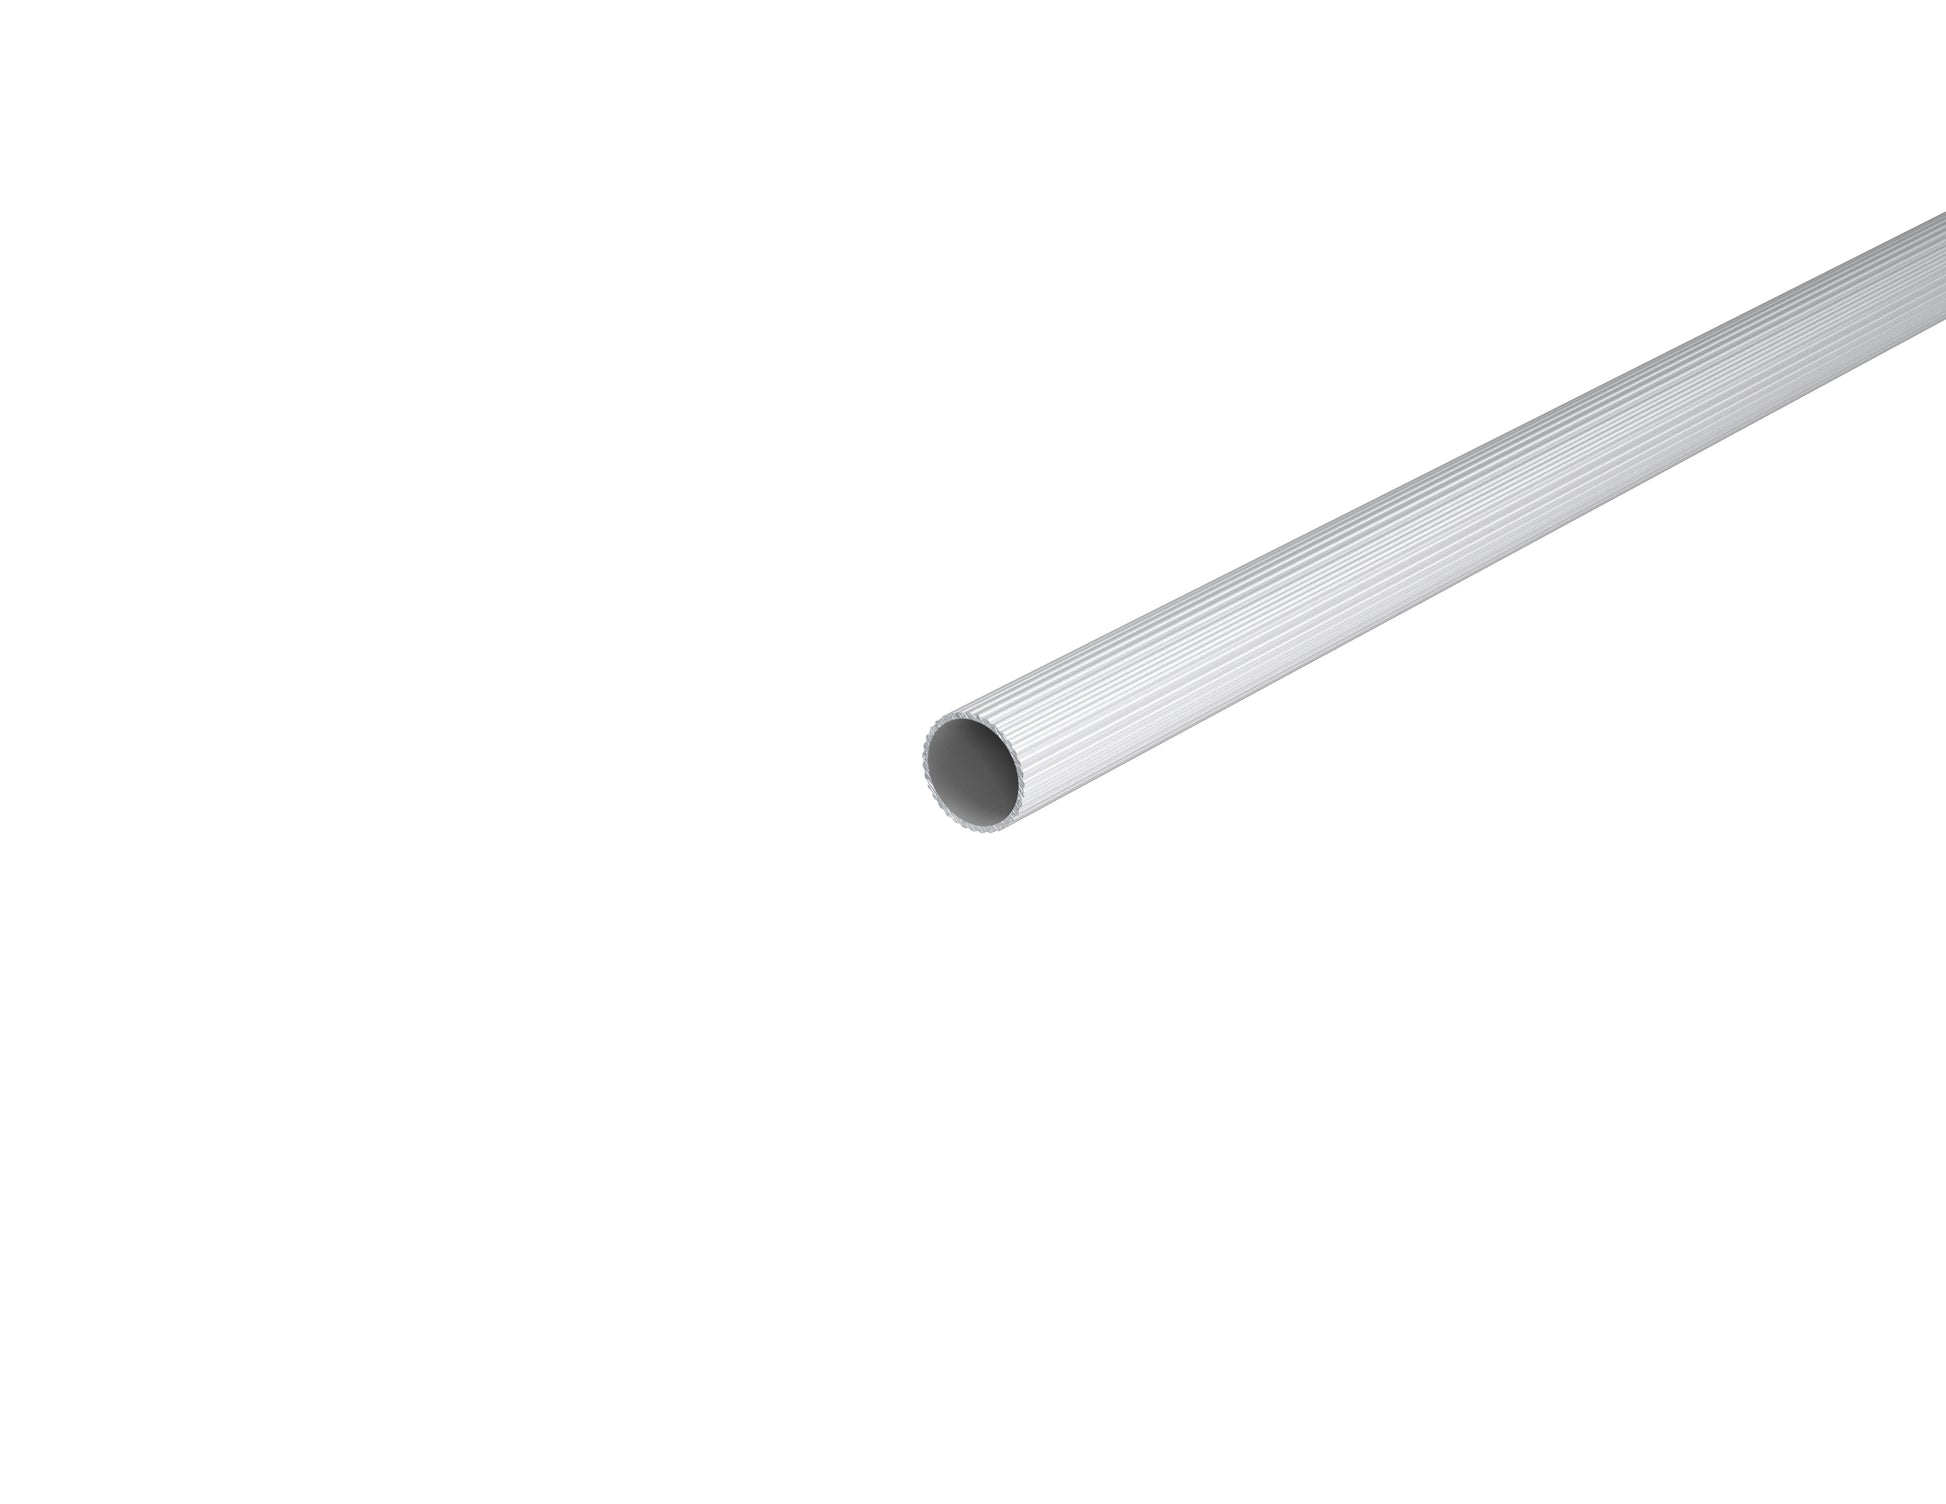 3/4" OD Fluted aluminum tube .038" wall mill finish serated exterior round extruded tube 0.75" diameter